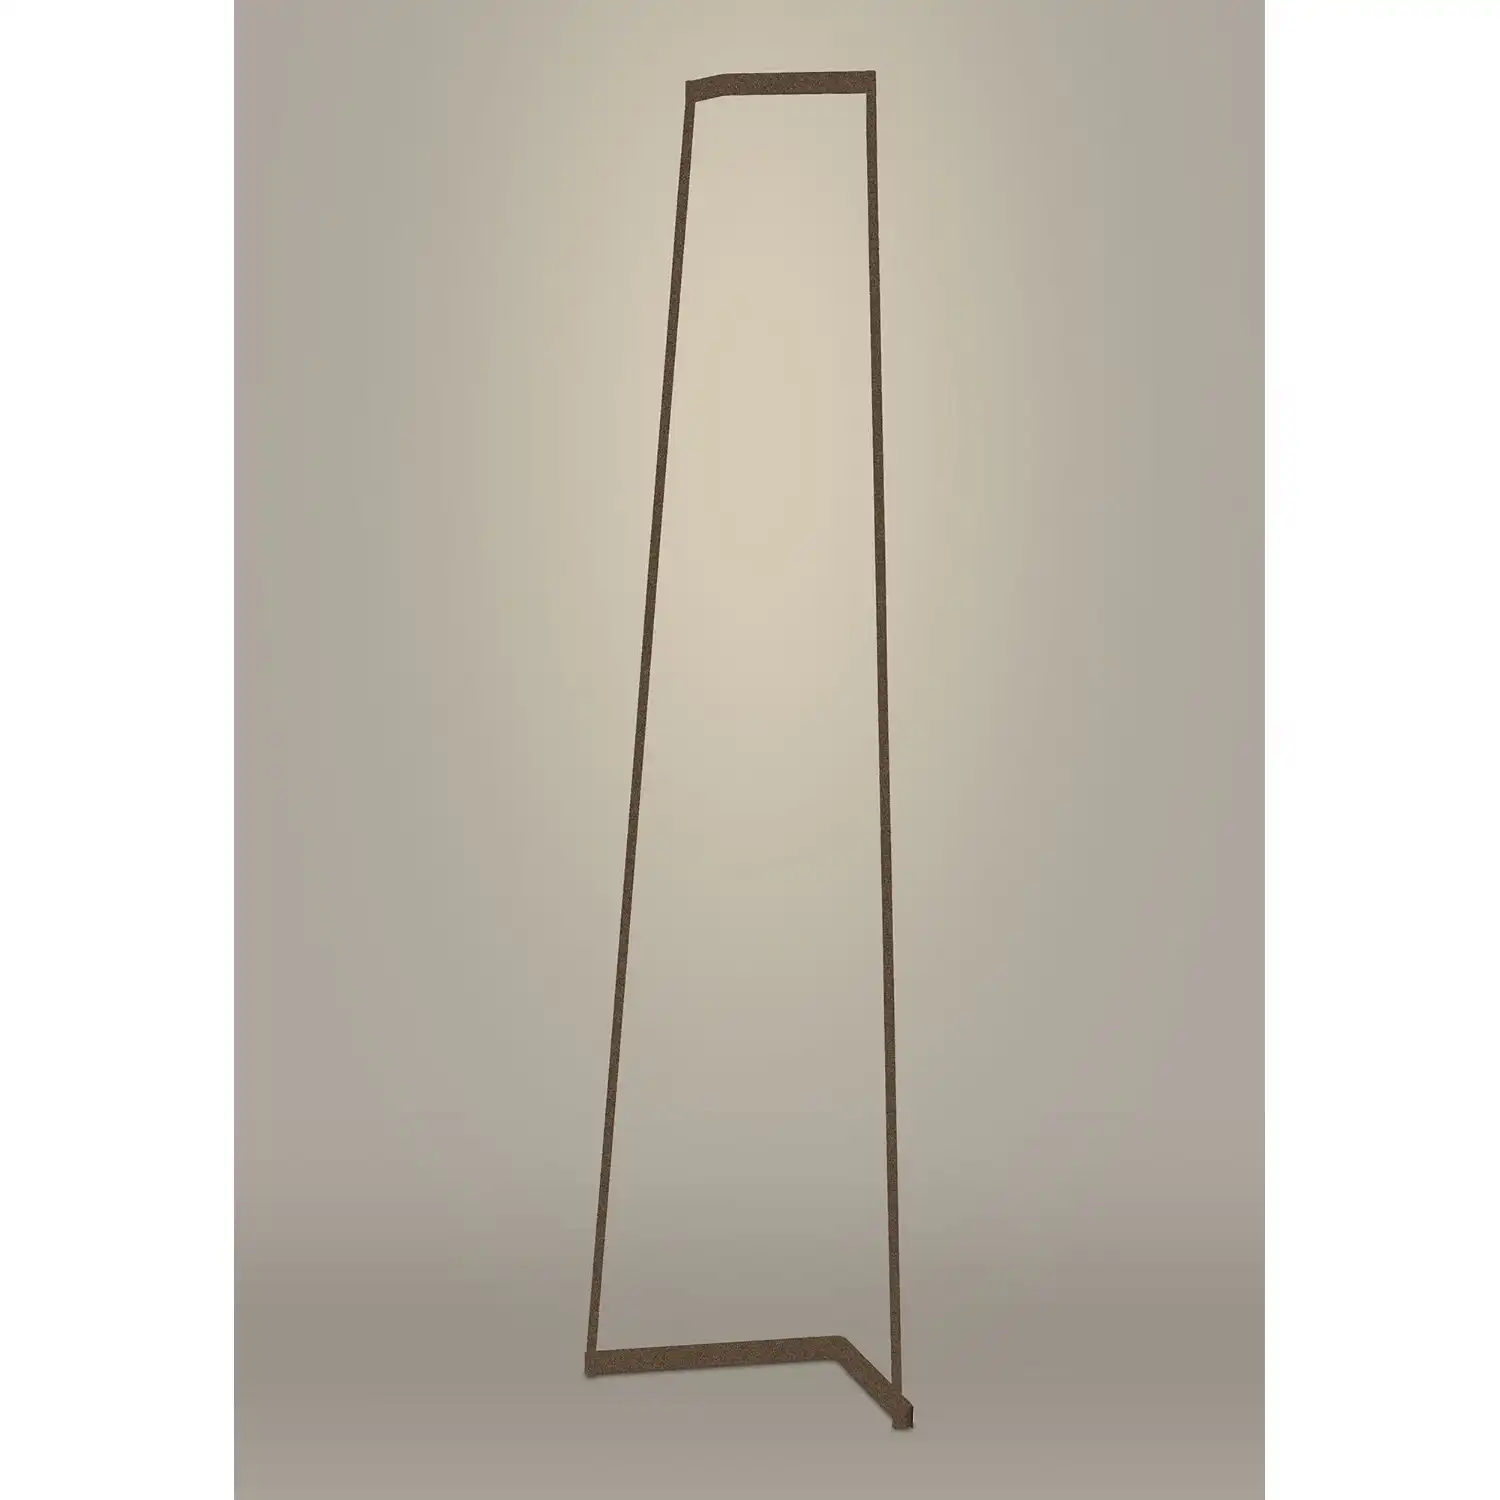 Minimal Floor Lamp, 40W LED, 3000K, 3000lm, Dimmable, Sand Brown, 3yrs Warranty